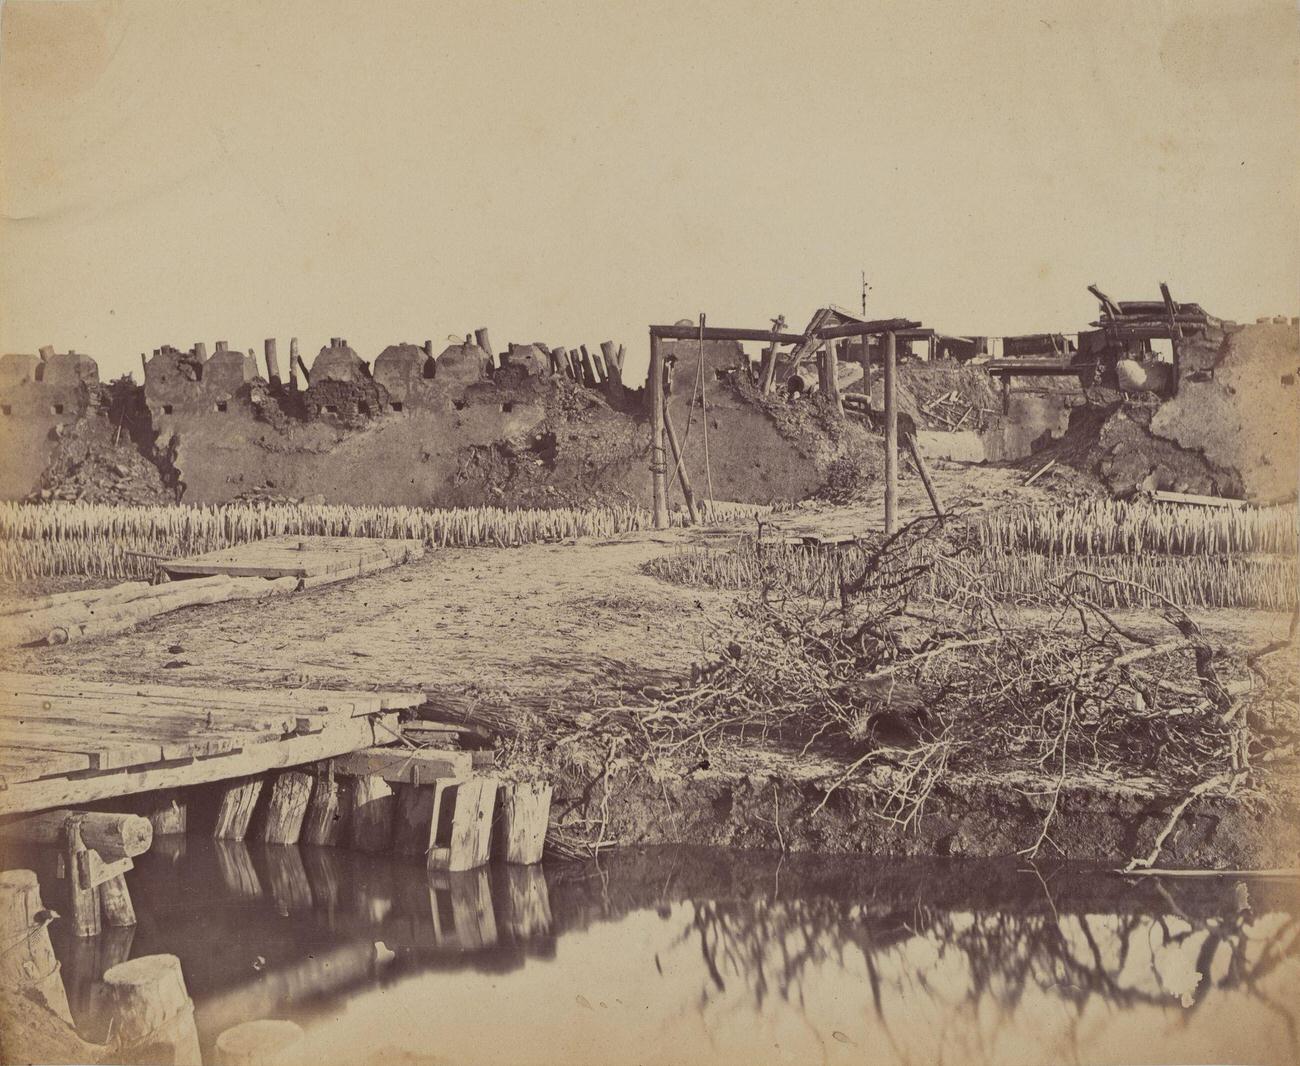 Exterior of North Fort Showing the English Entrance, August 21, 1860